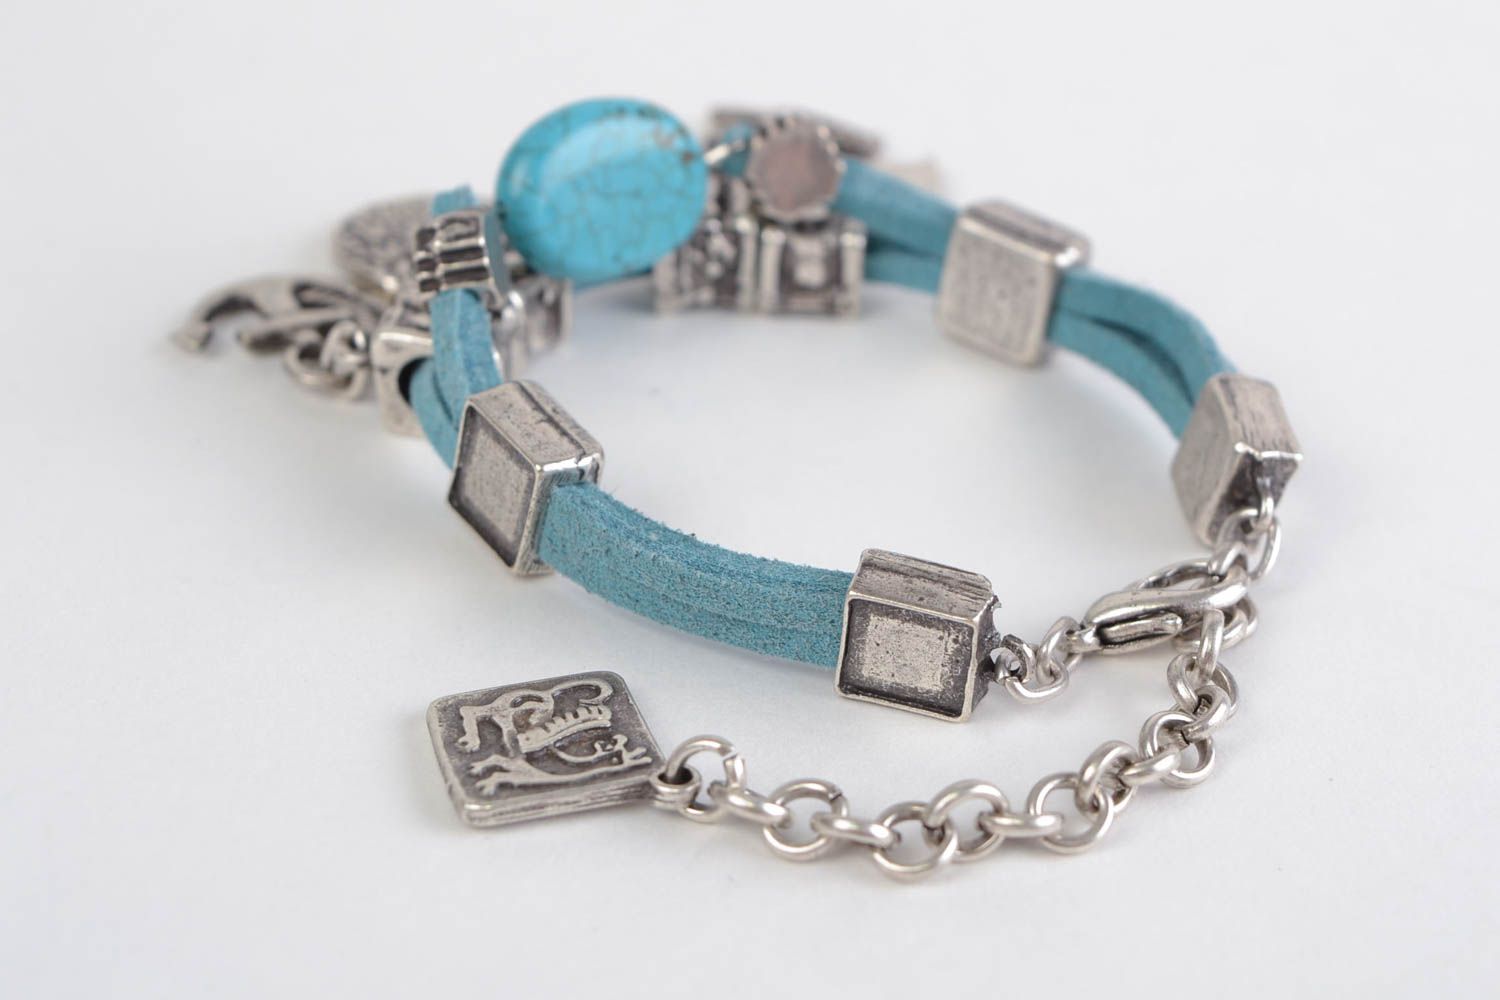 Handmade leather cord wrist bracelet with metal charms and turquoise for women photo 3